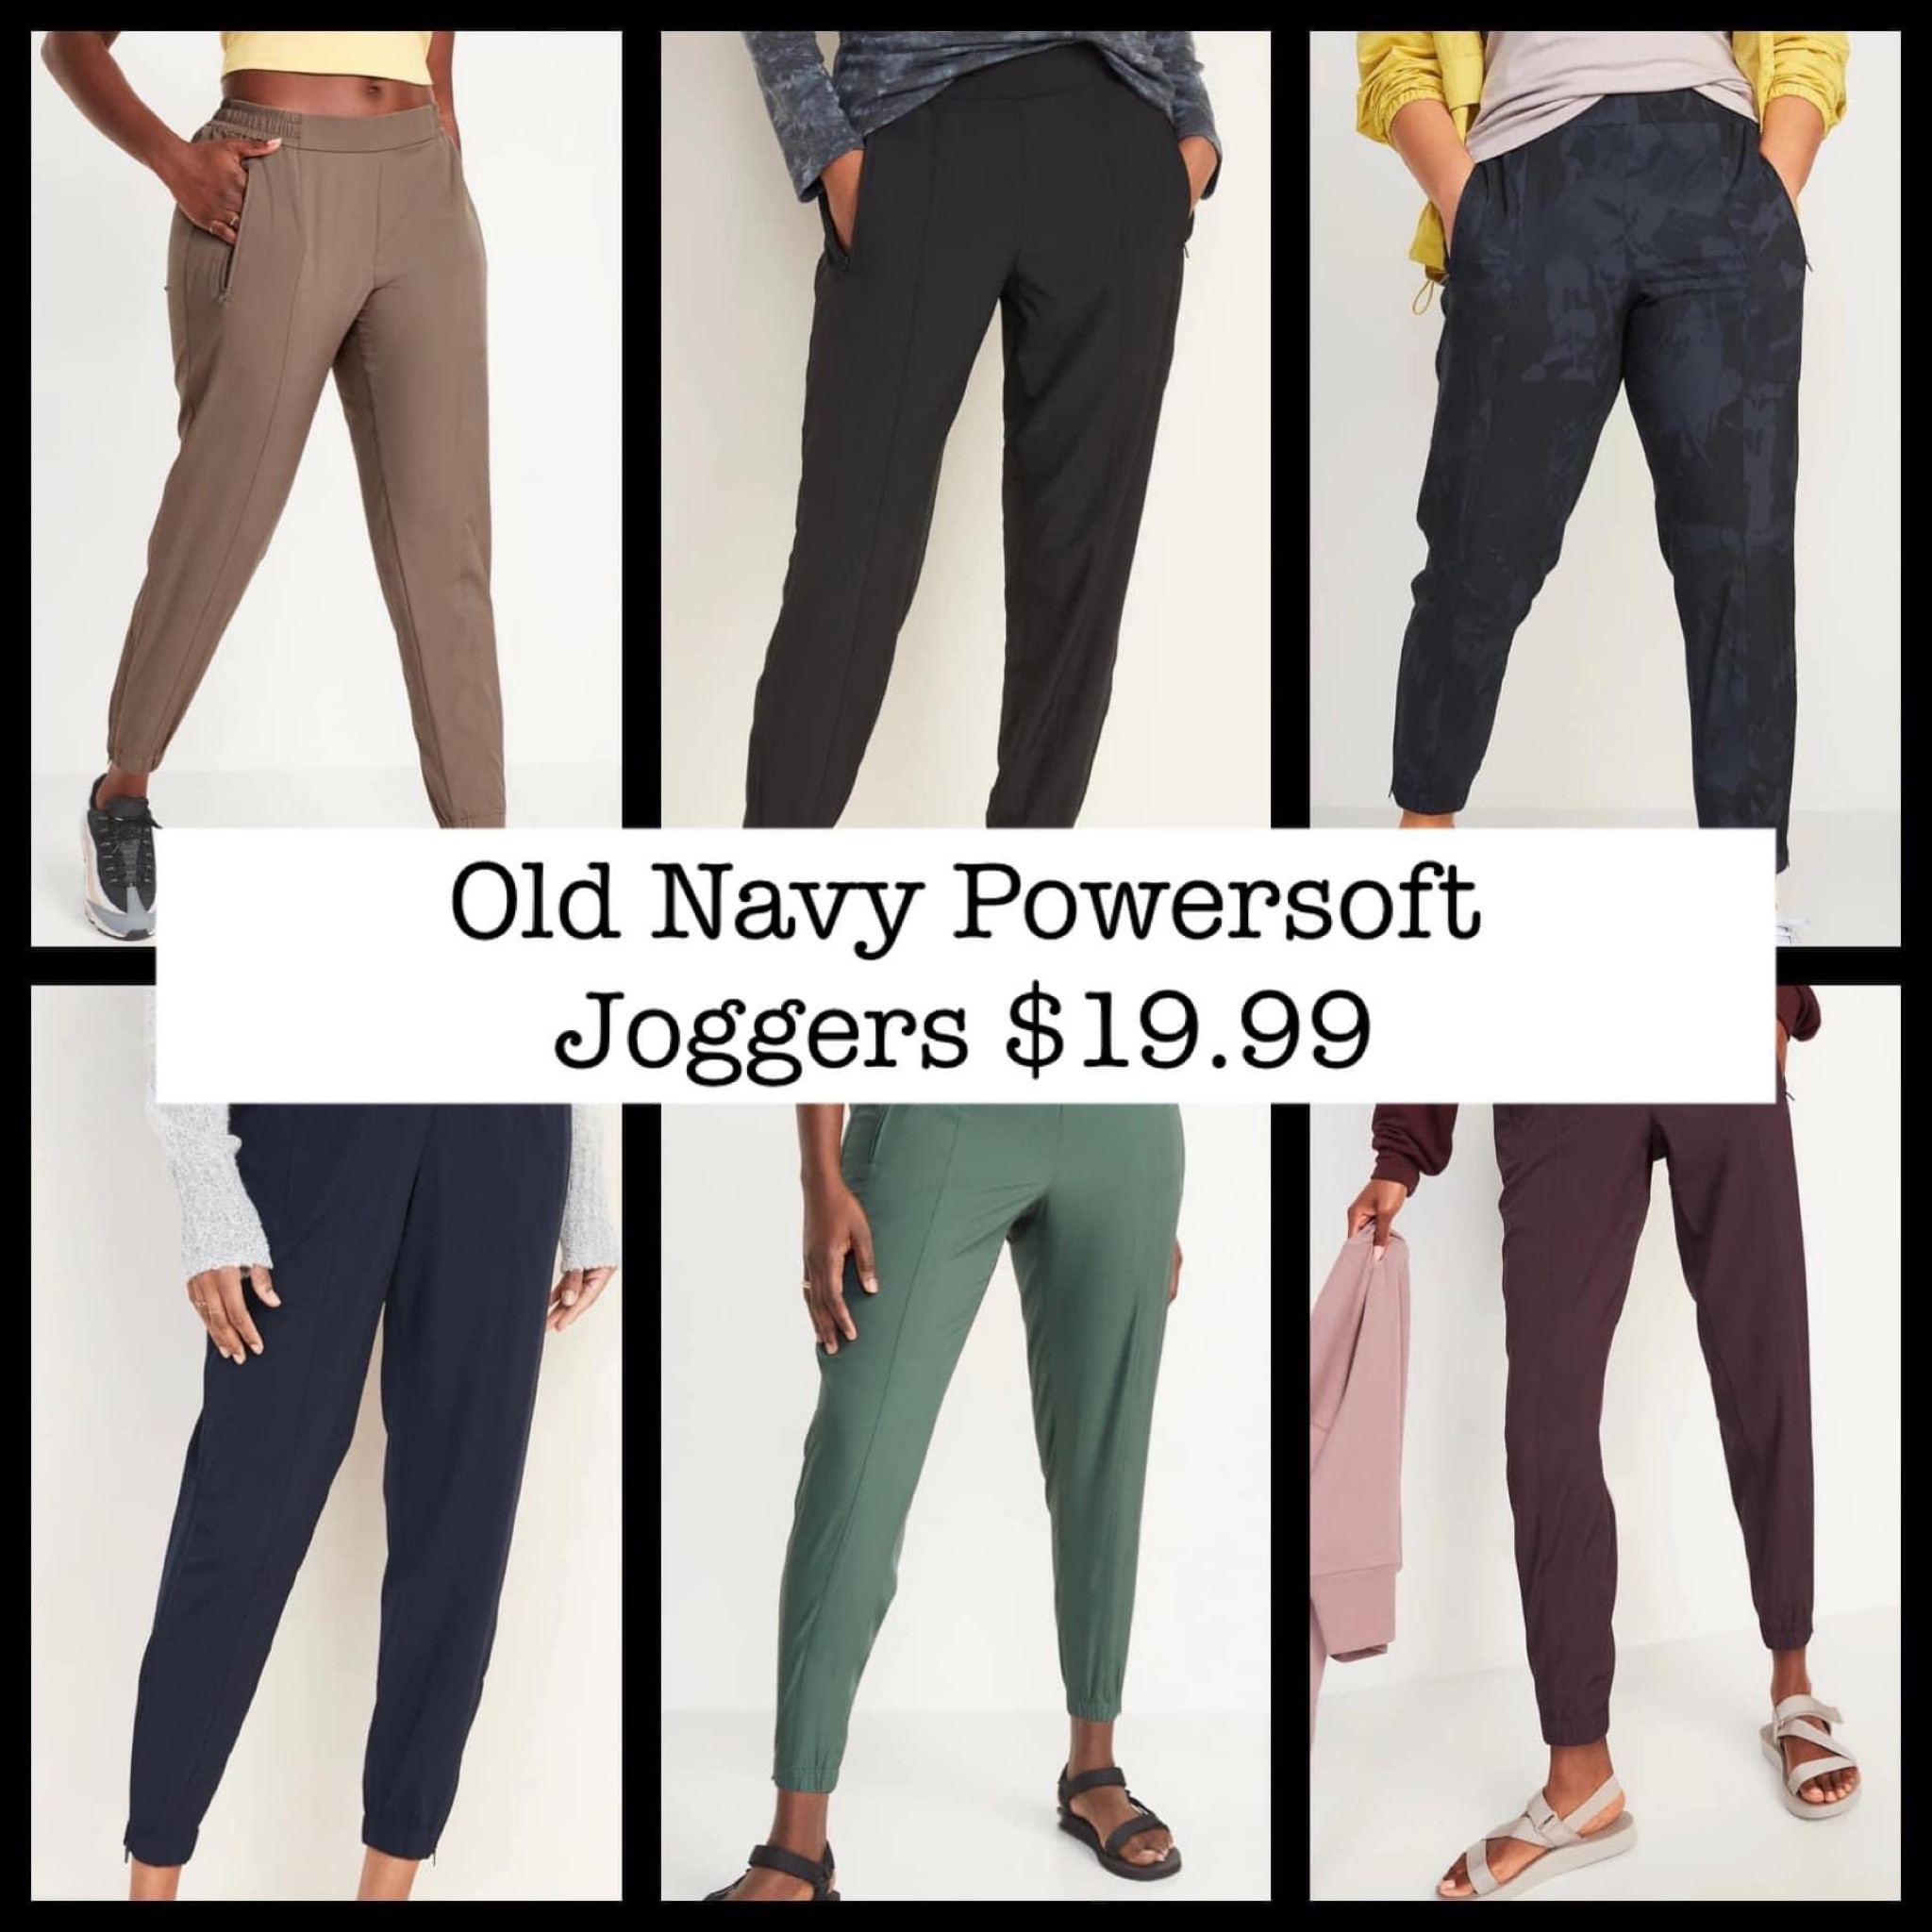 High-Waisted PowerSoft 7/8-Length Joggers for Women